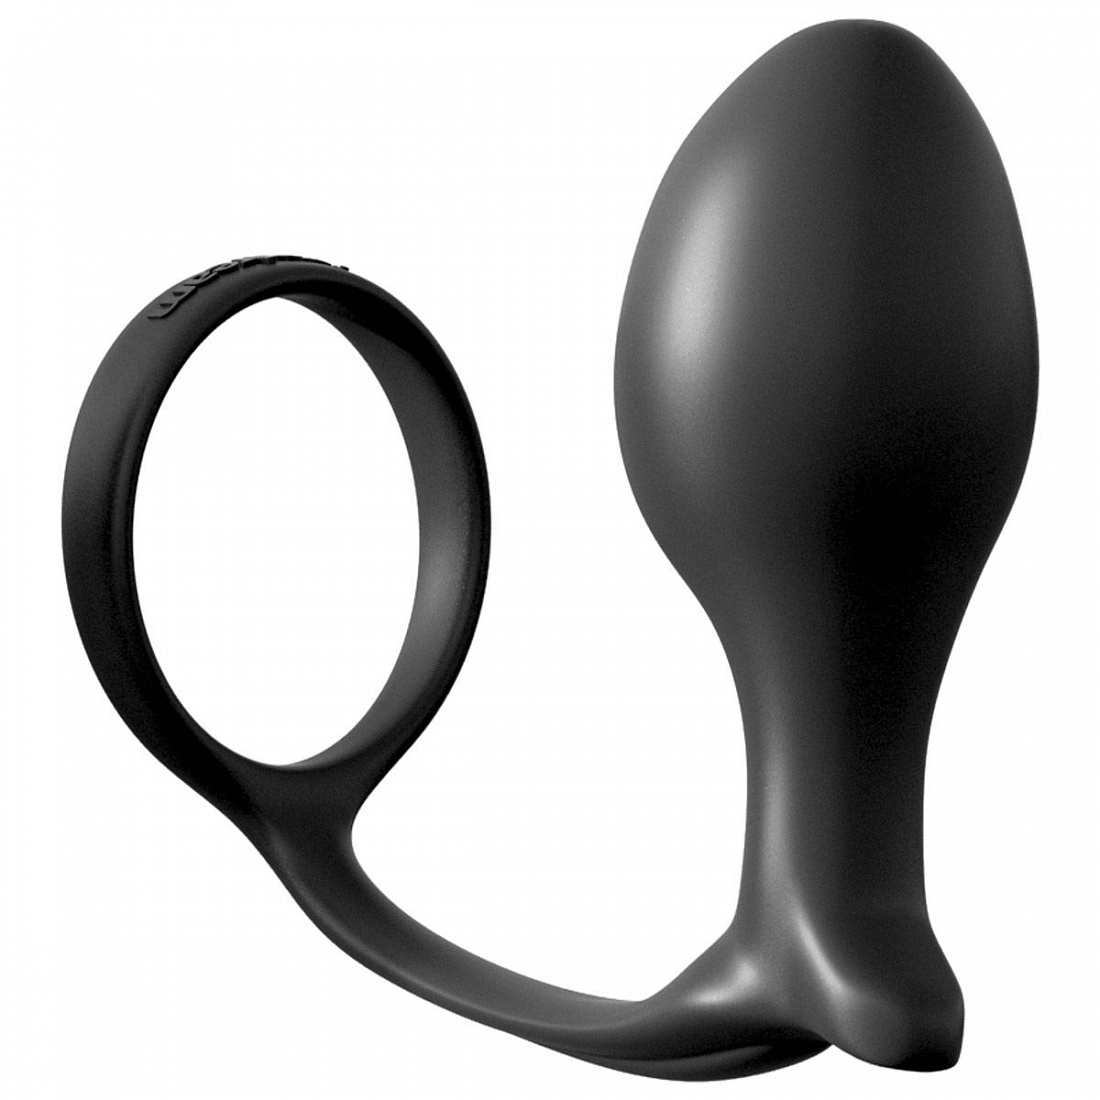   Ass-Gasm Cockring Advanced Plug    Pipedream PD4694-23 -  